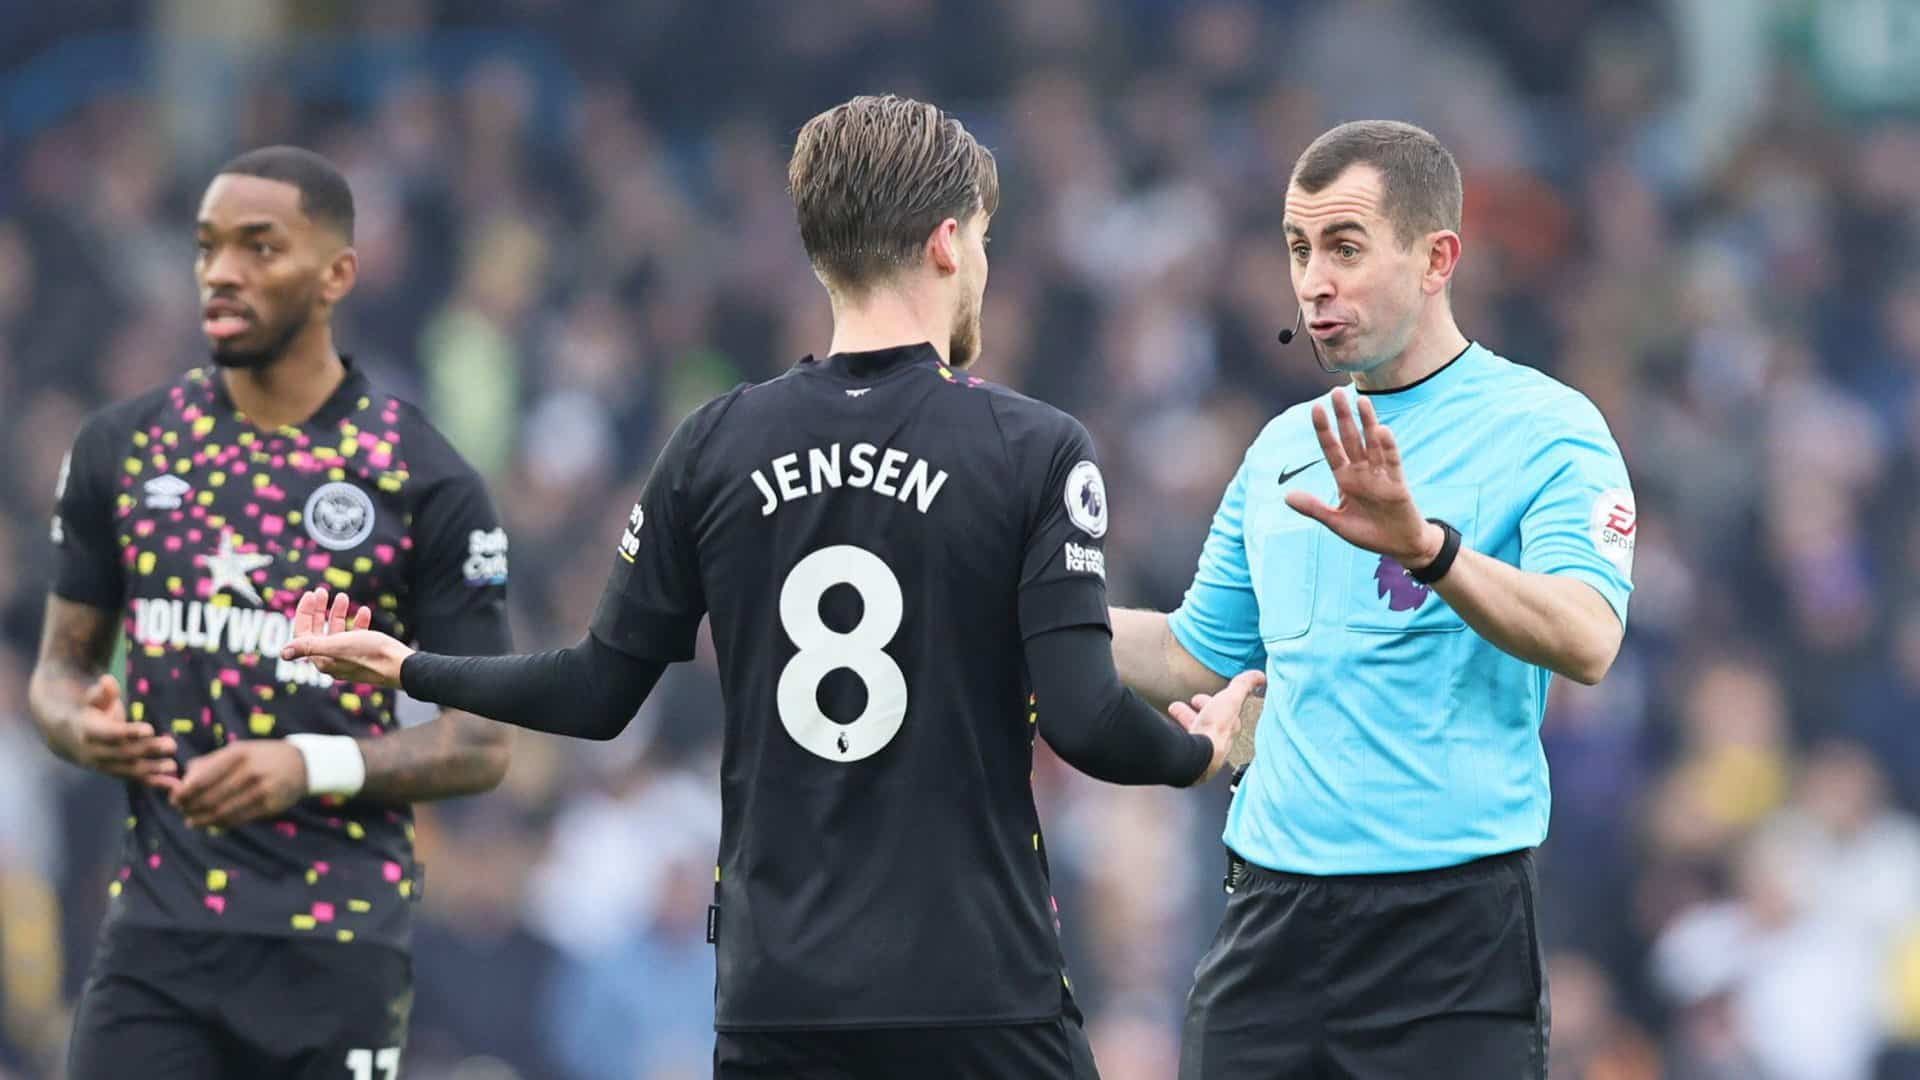 A photo of referee Peter Bankes discussion midfield strategy with Brentford's Mathias Jensen